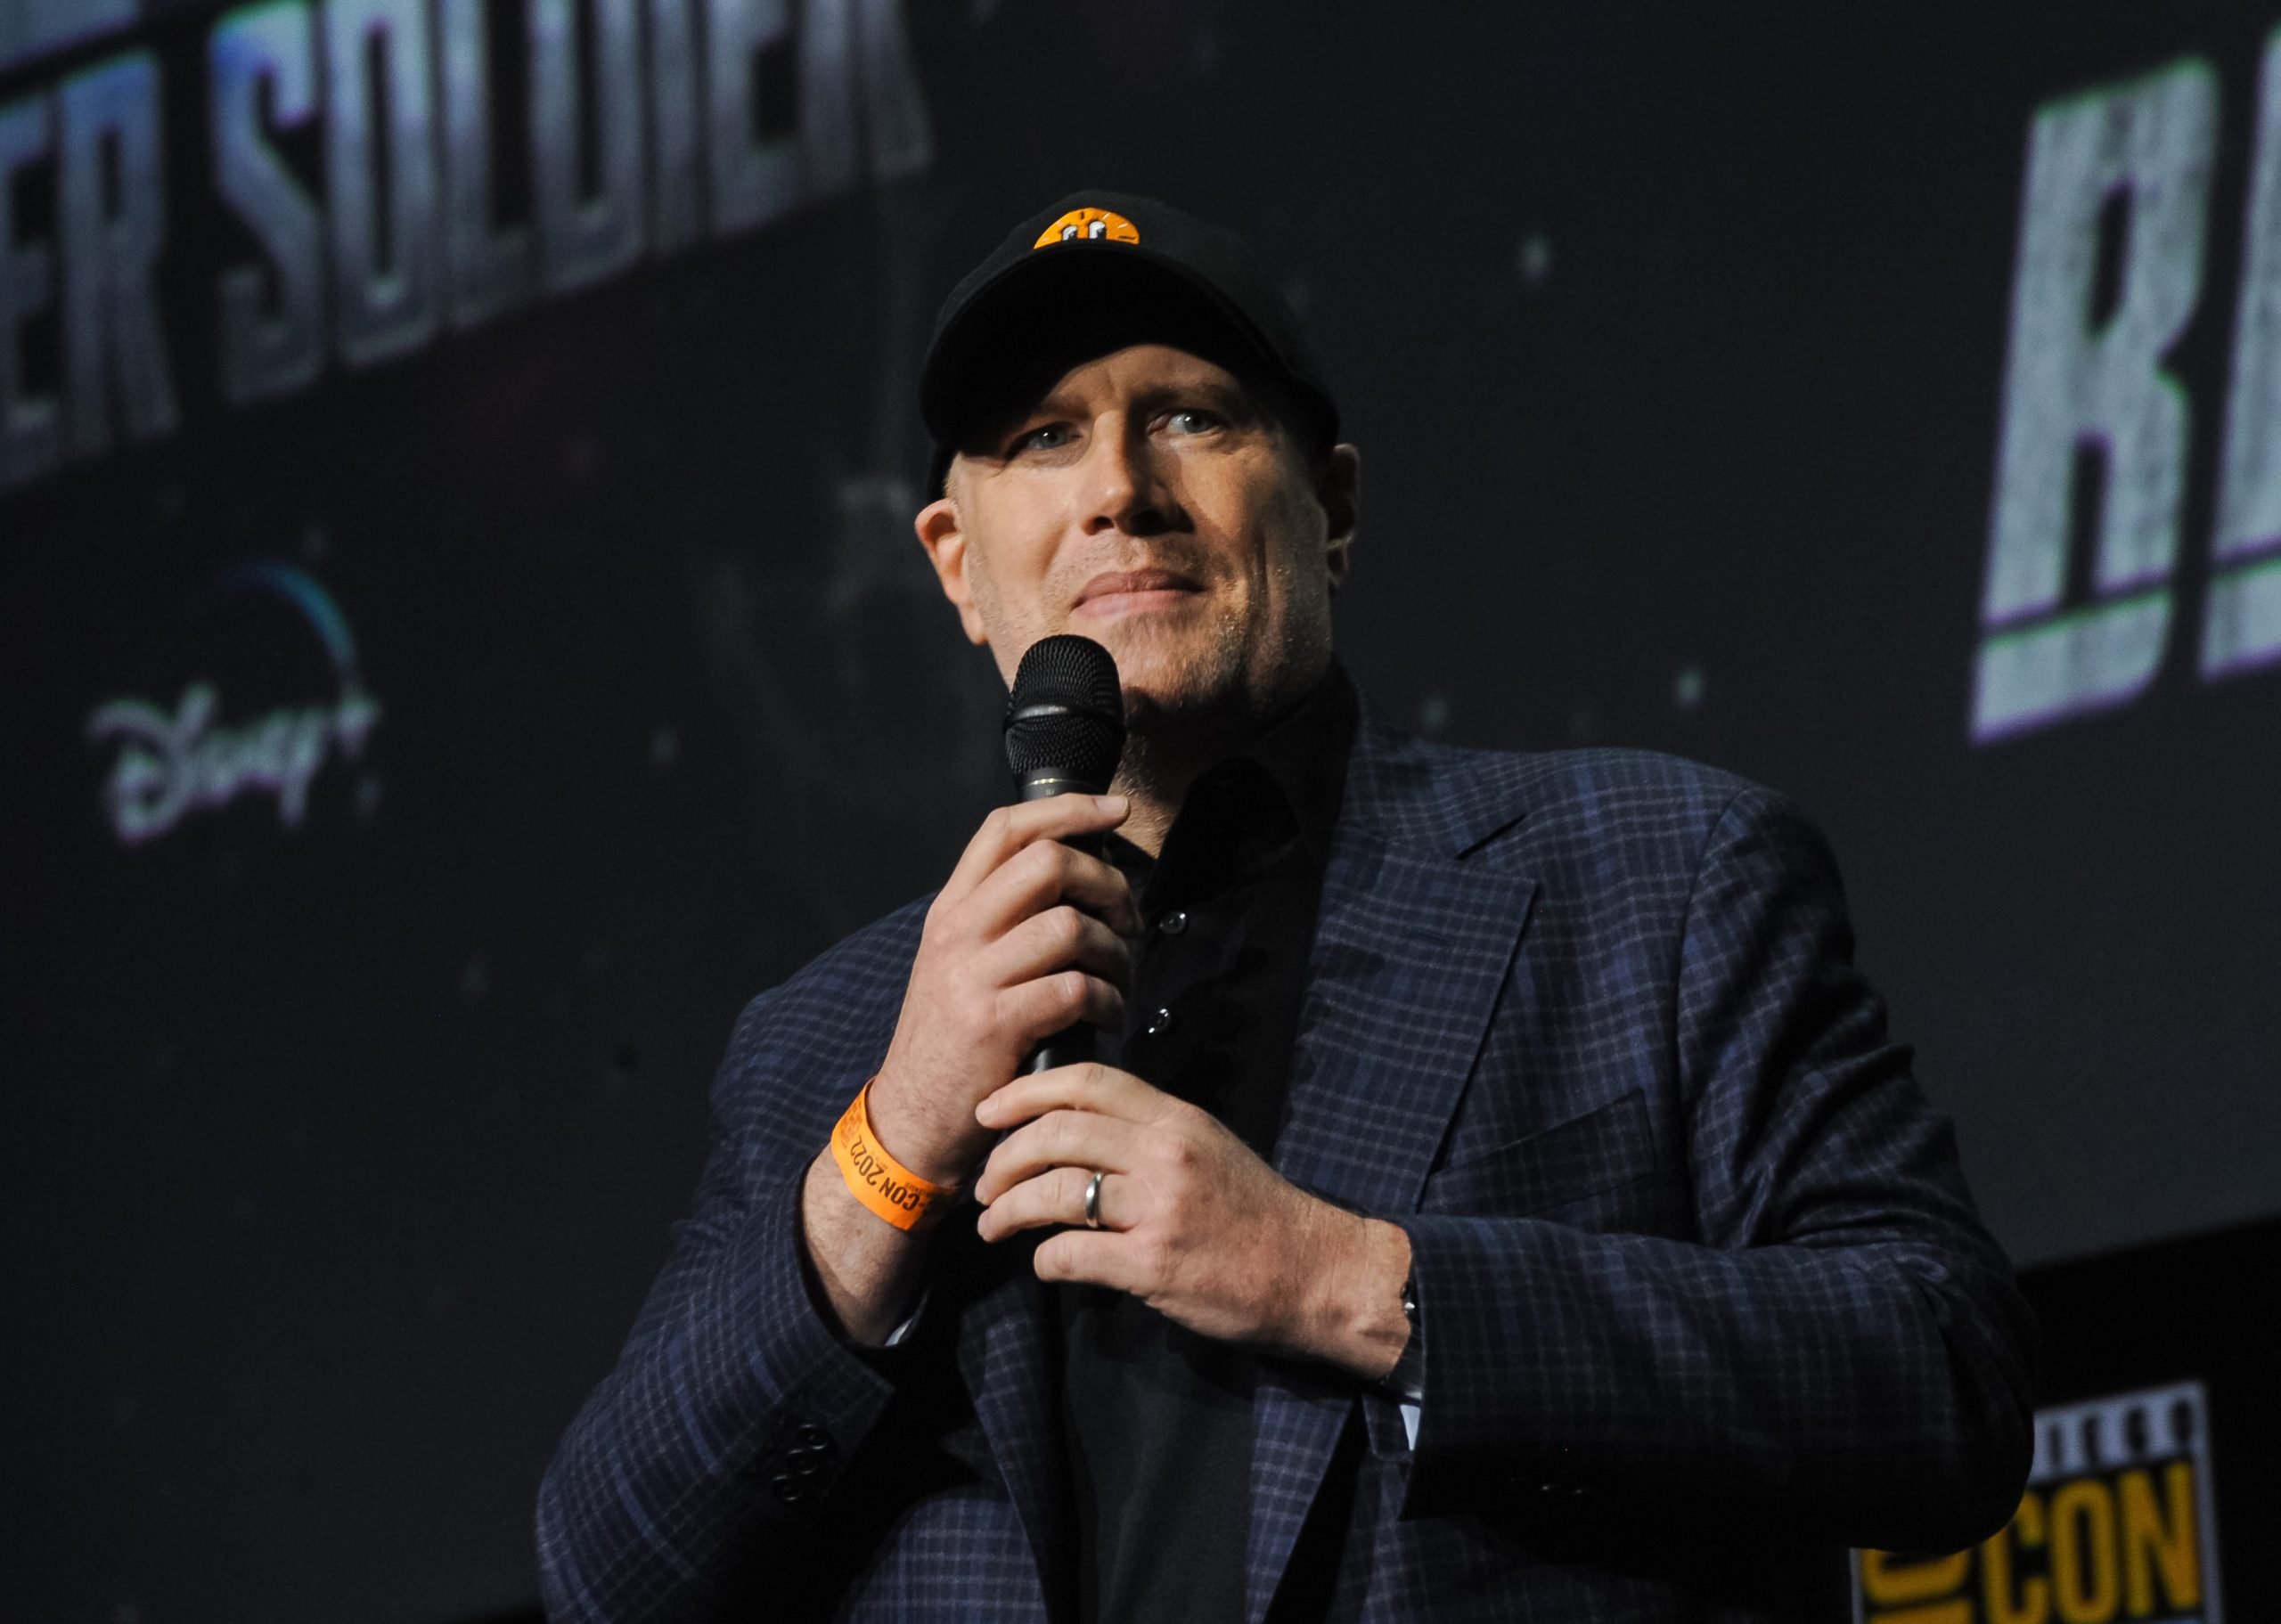 Kevin Feige, who spearheaded Phase 4 of the MCU, wears